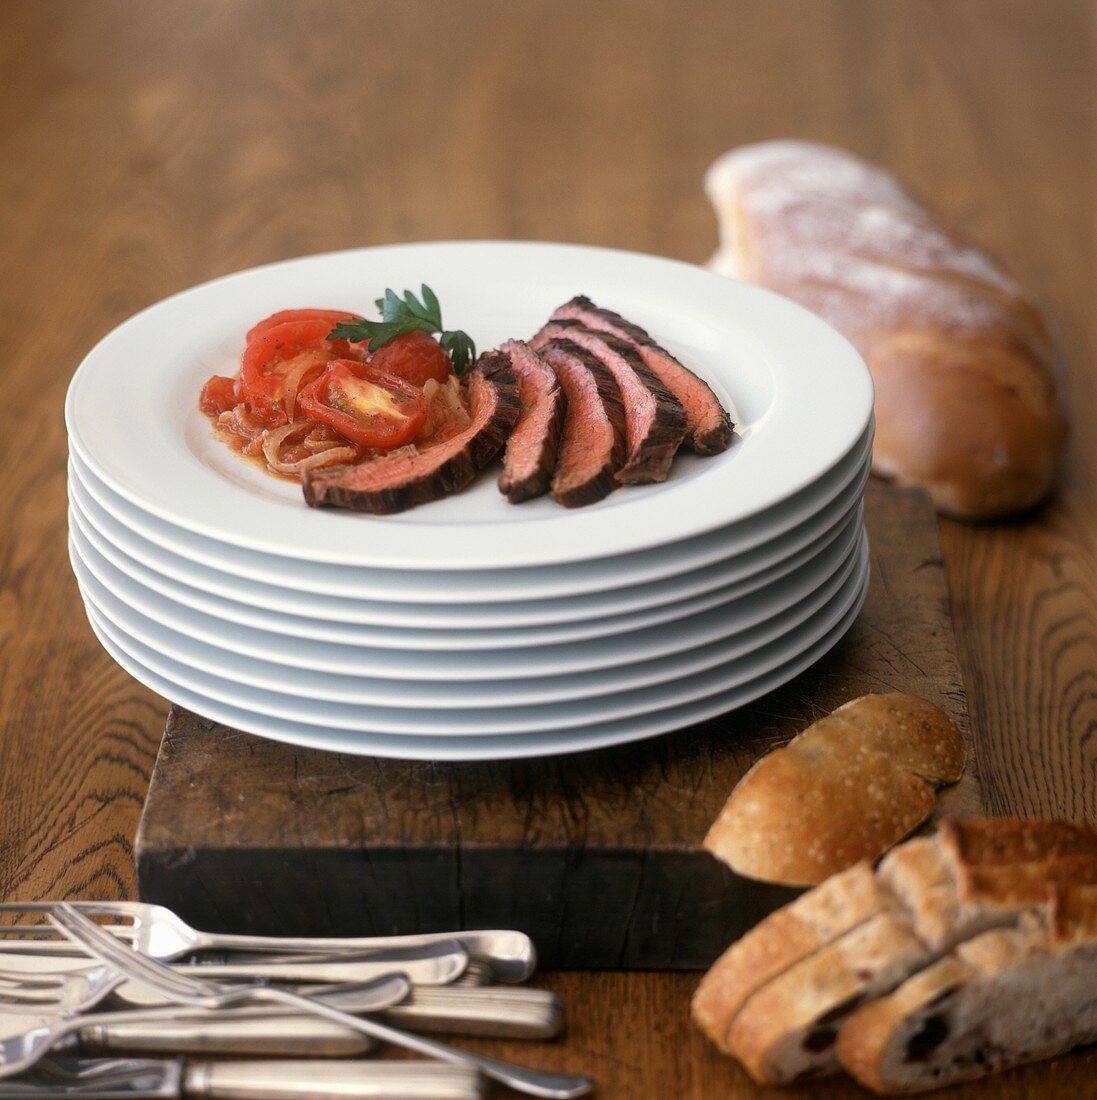 Beef steak with tomatoes and onions; olive bread